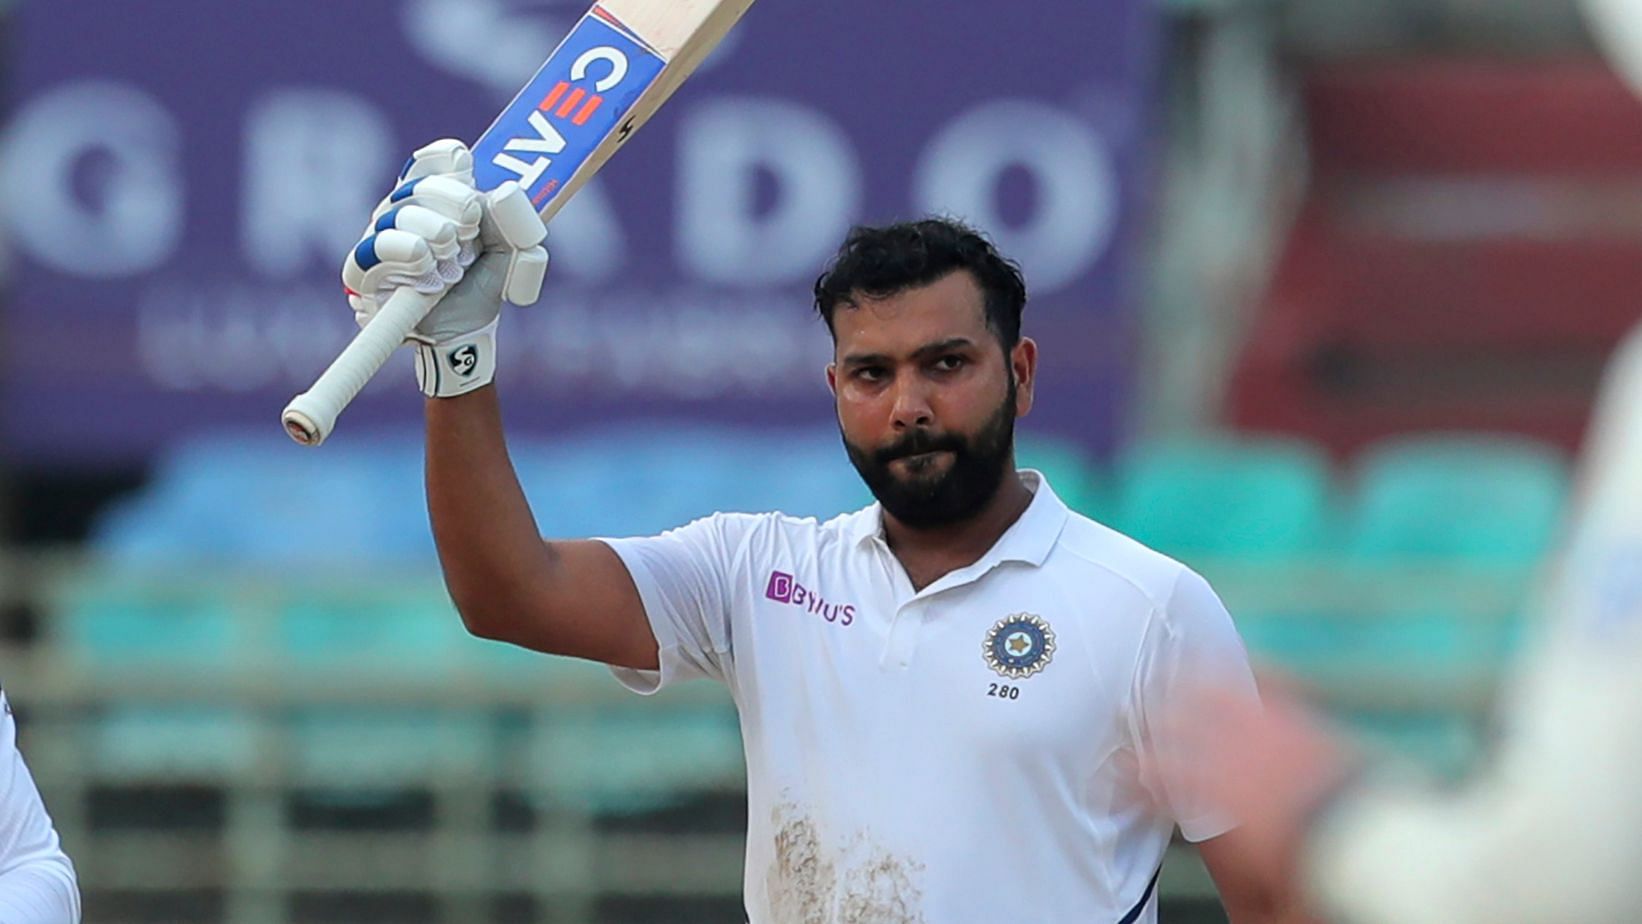 India batsman Rohit Sharma became the first player to score a century in each innings of his maiden Test as opener.